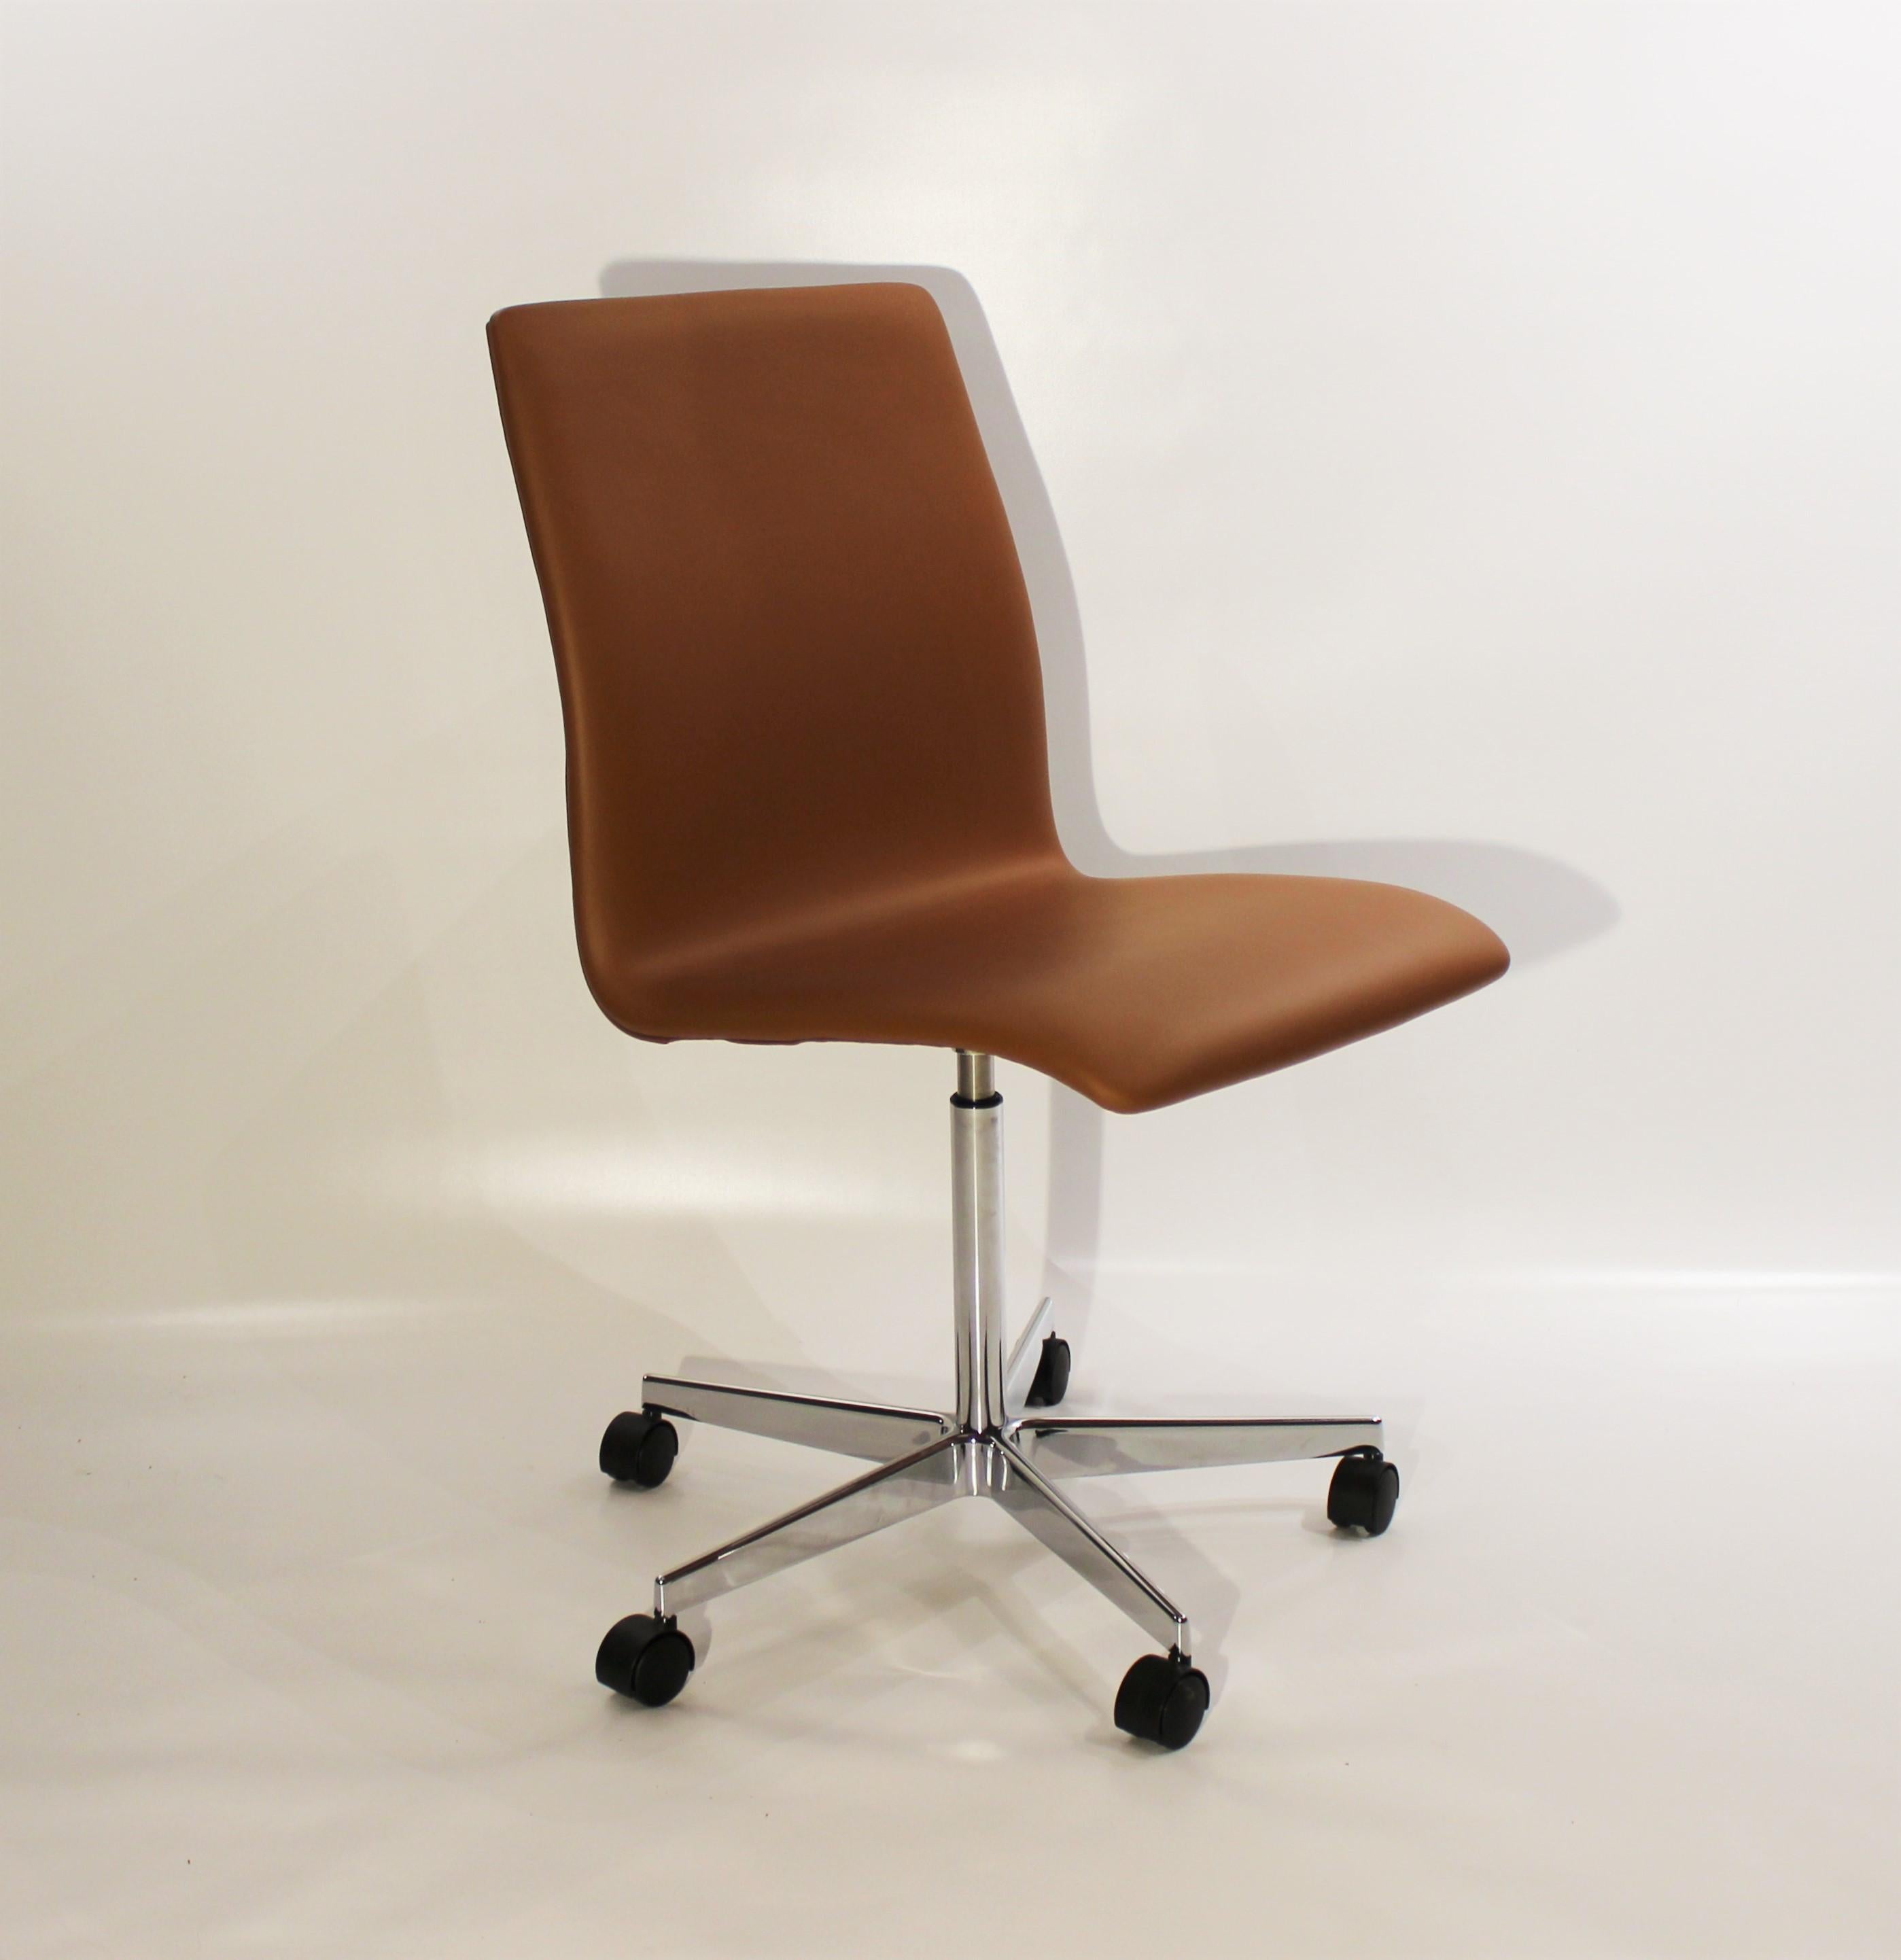 Oxford Classic office chair, model 3171, in cognac colored savanne leather designed by Arne Jacobsen in 1963 and manufactured by Fritz Hansen in the 1990s.